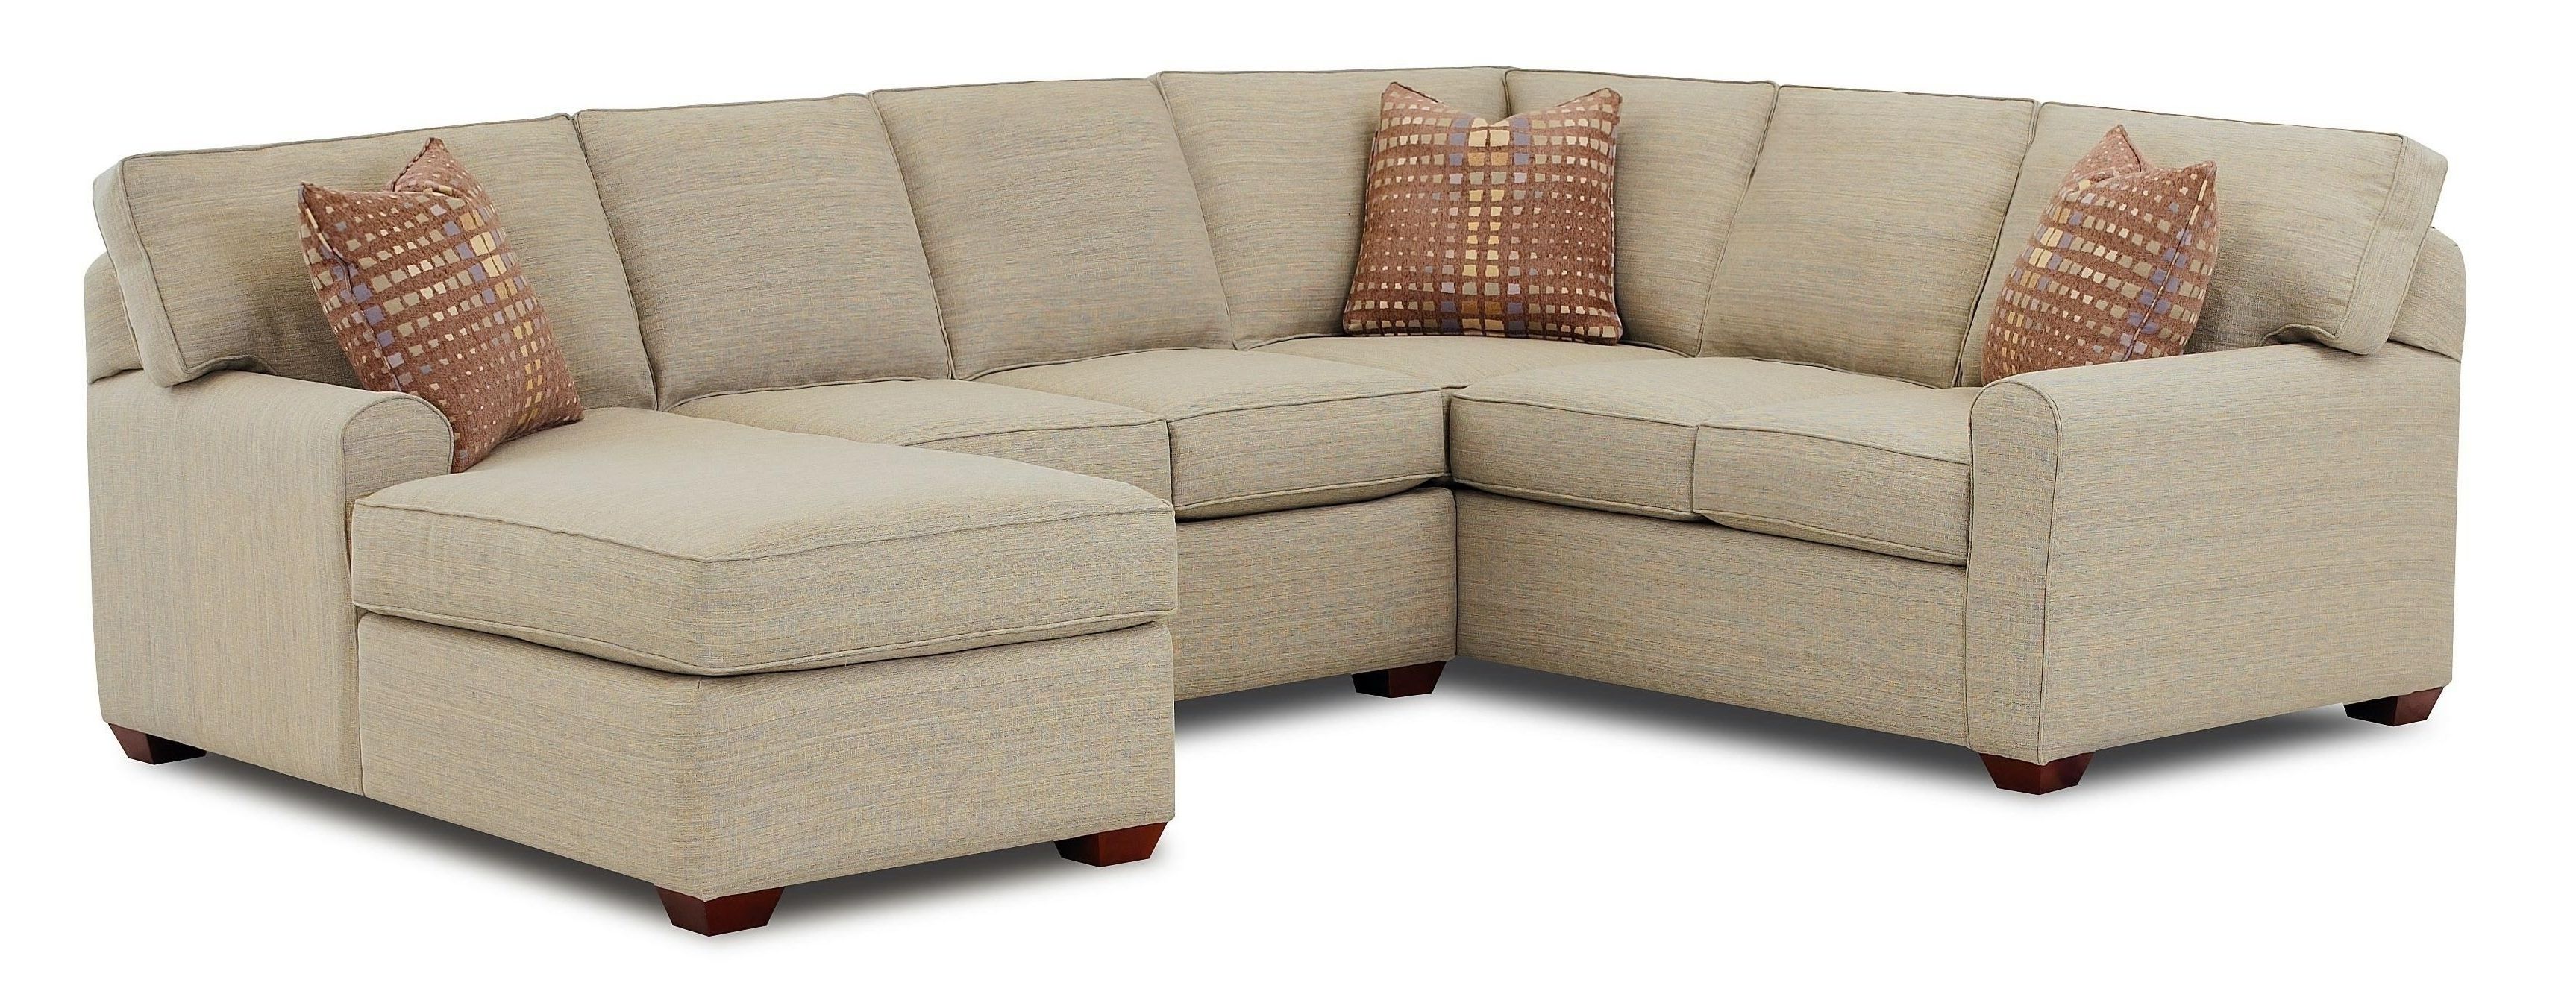 Most Current Sectional Sofa Design: Small Sectional Sofa With Chaise Lounge For Small Sectional Sofas With Chaise (View 8 of 15)